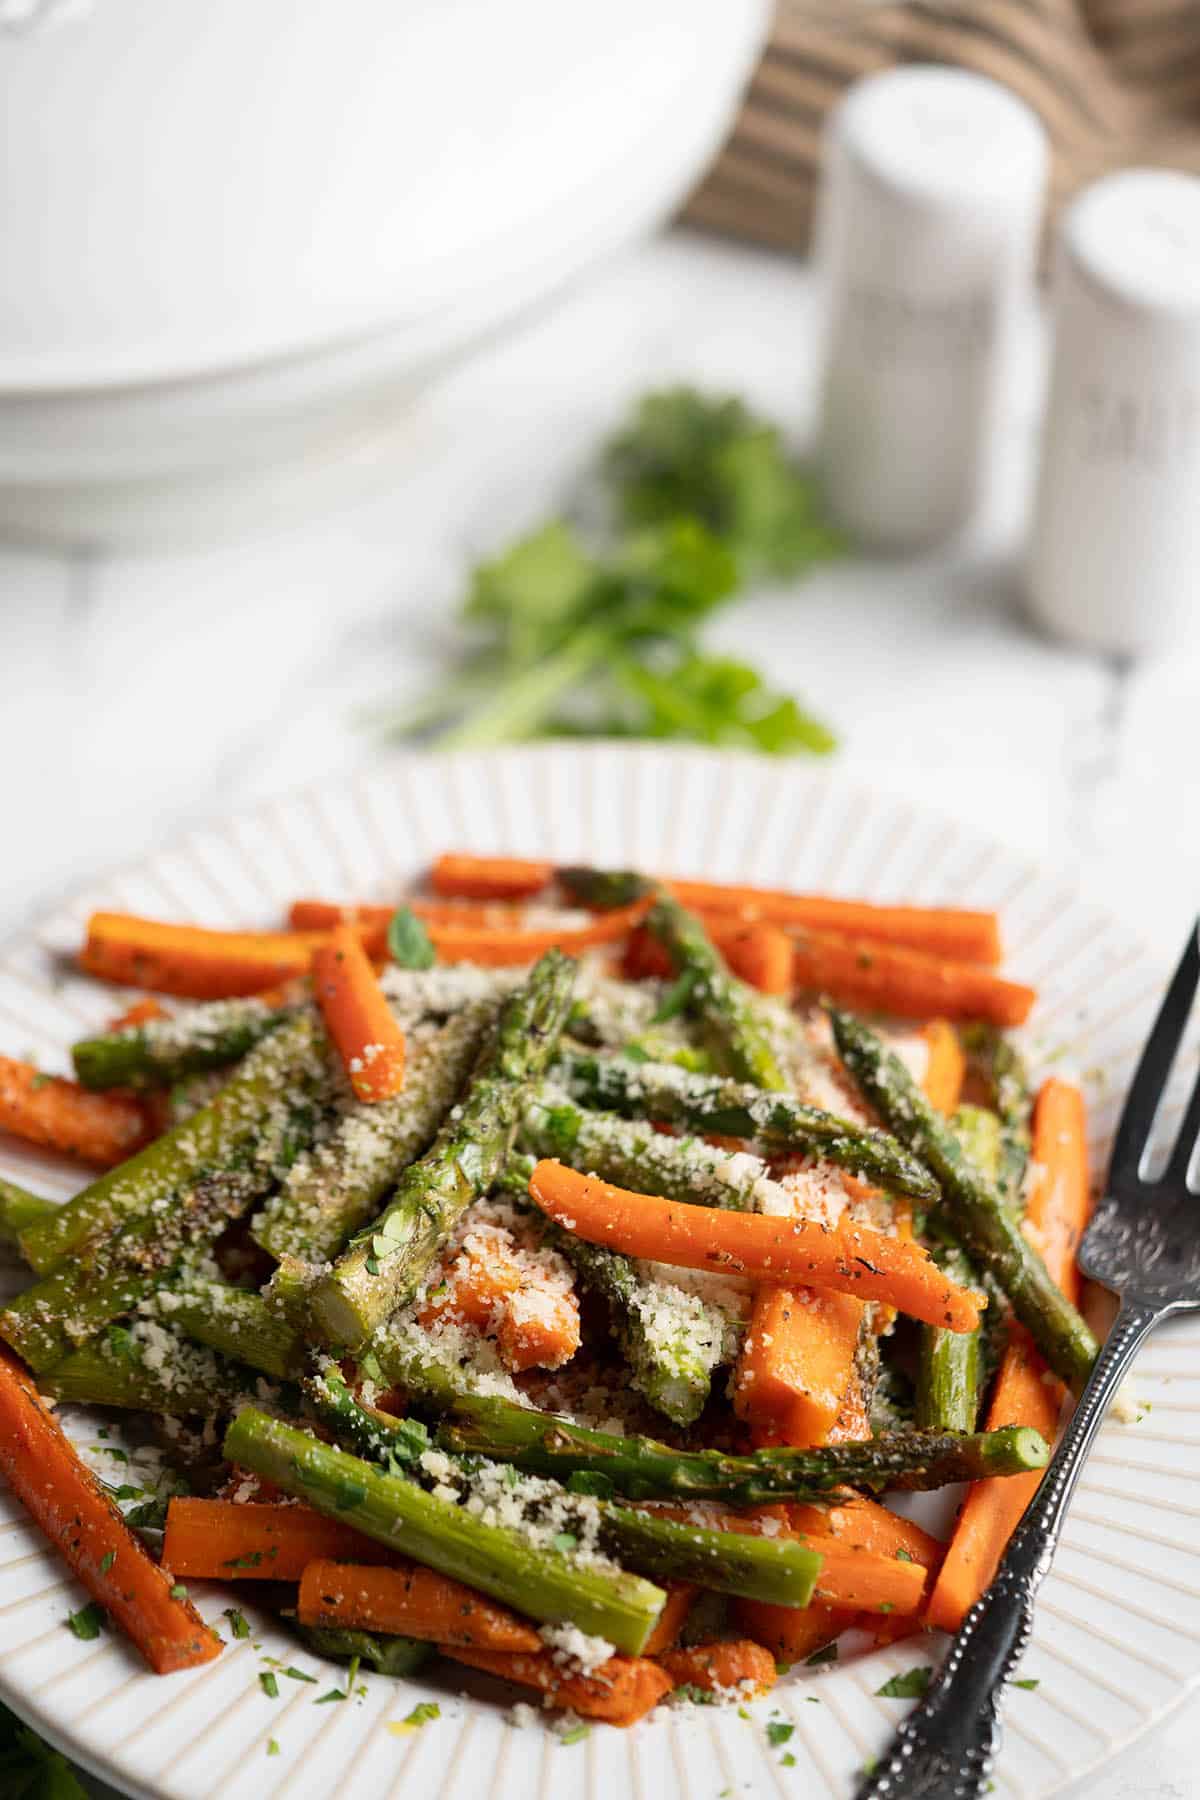 Roasted Carrots and asparagus on a serving tray.